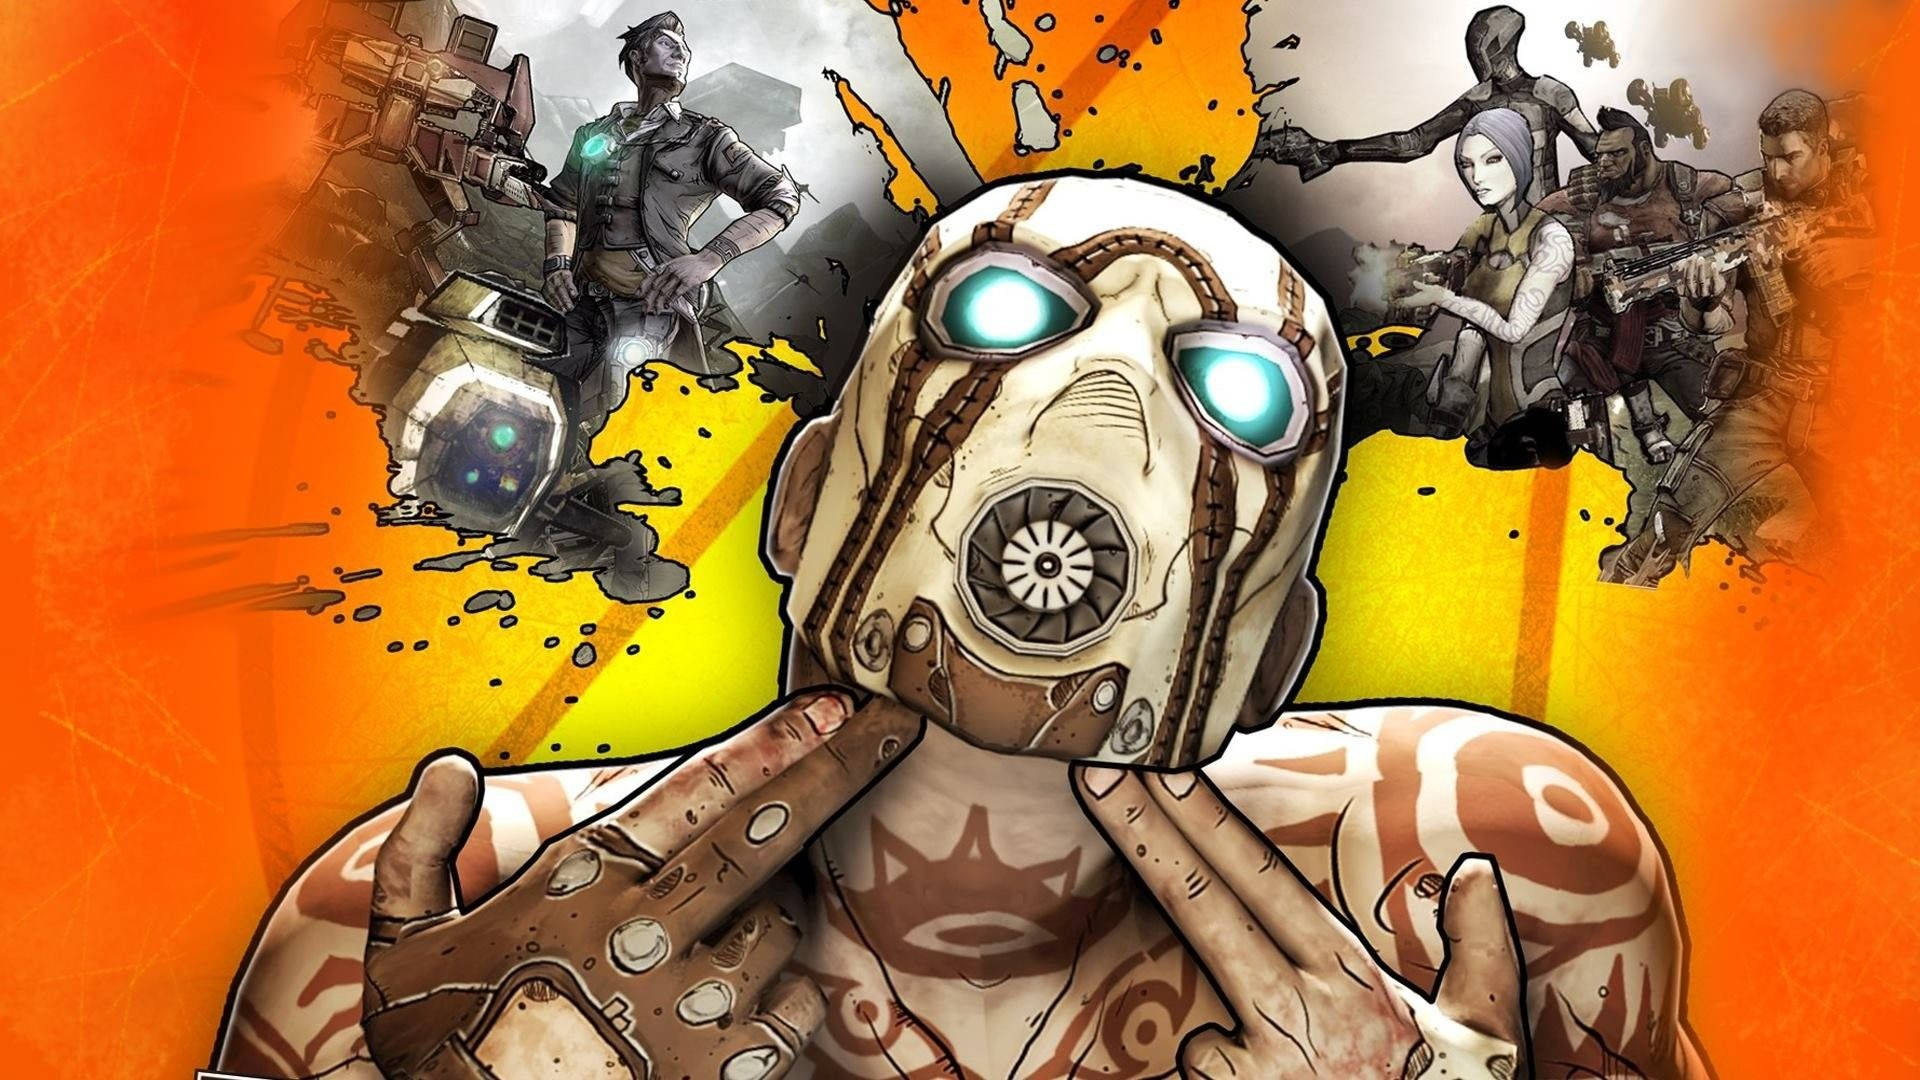 Fight your way with Psycho in Borderlands Wallpaper